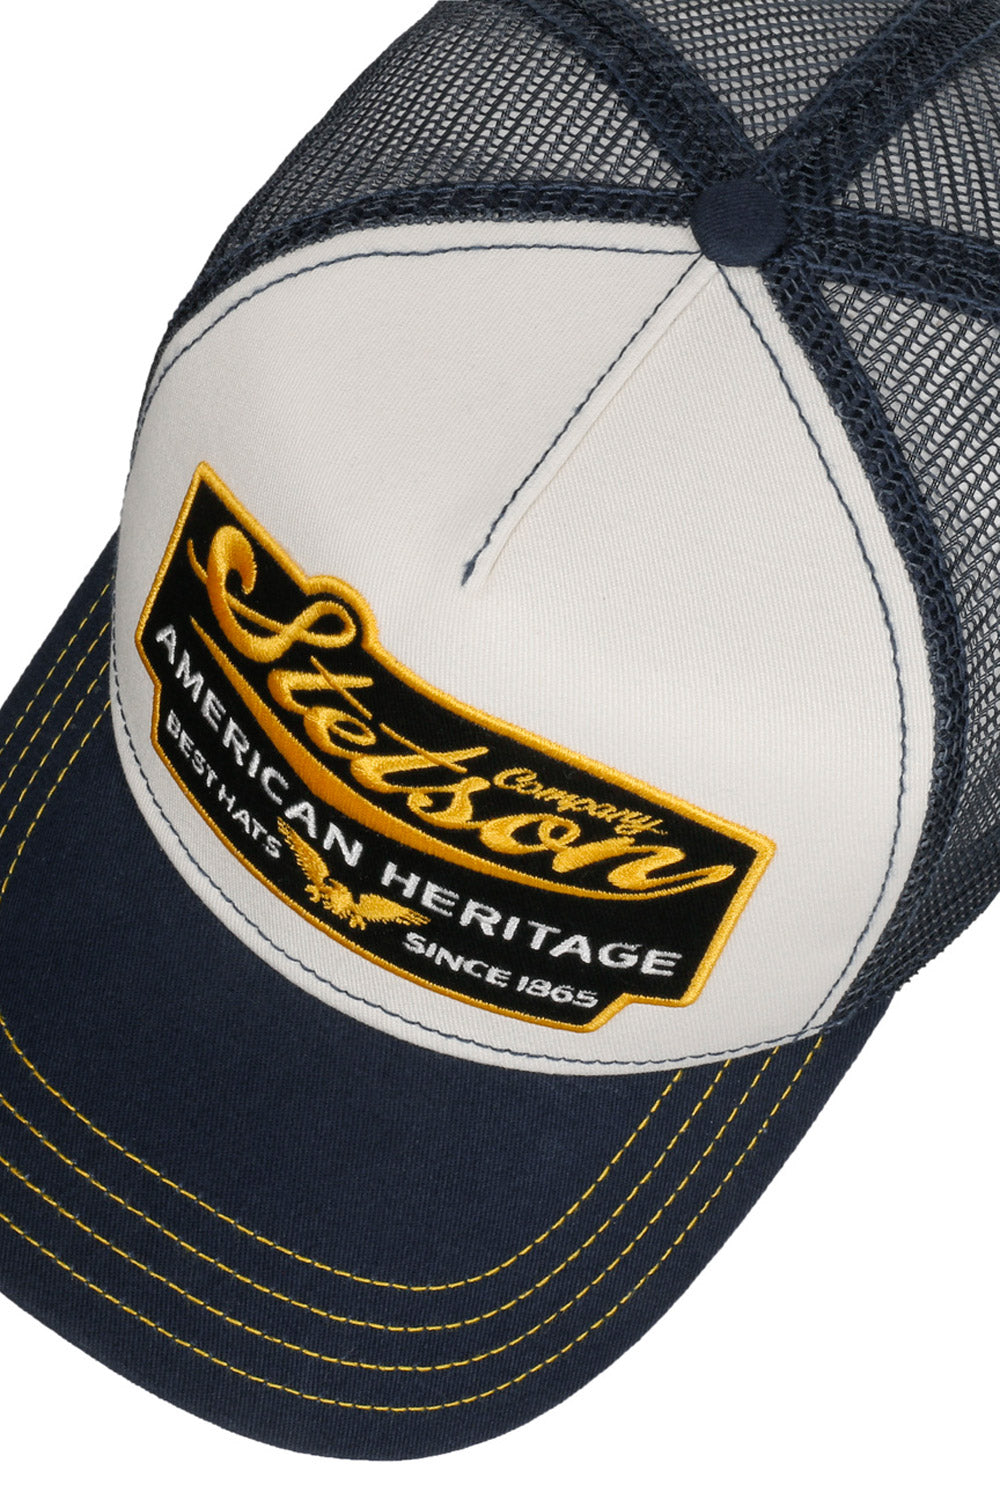 Buy the Stetson American Heritage Trucker Cap in Navy/White at Intro. Spend £50 for free UK delivery. Official stockists. We ship worldwide.